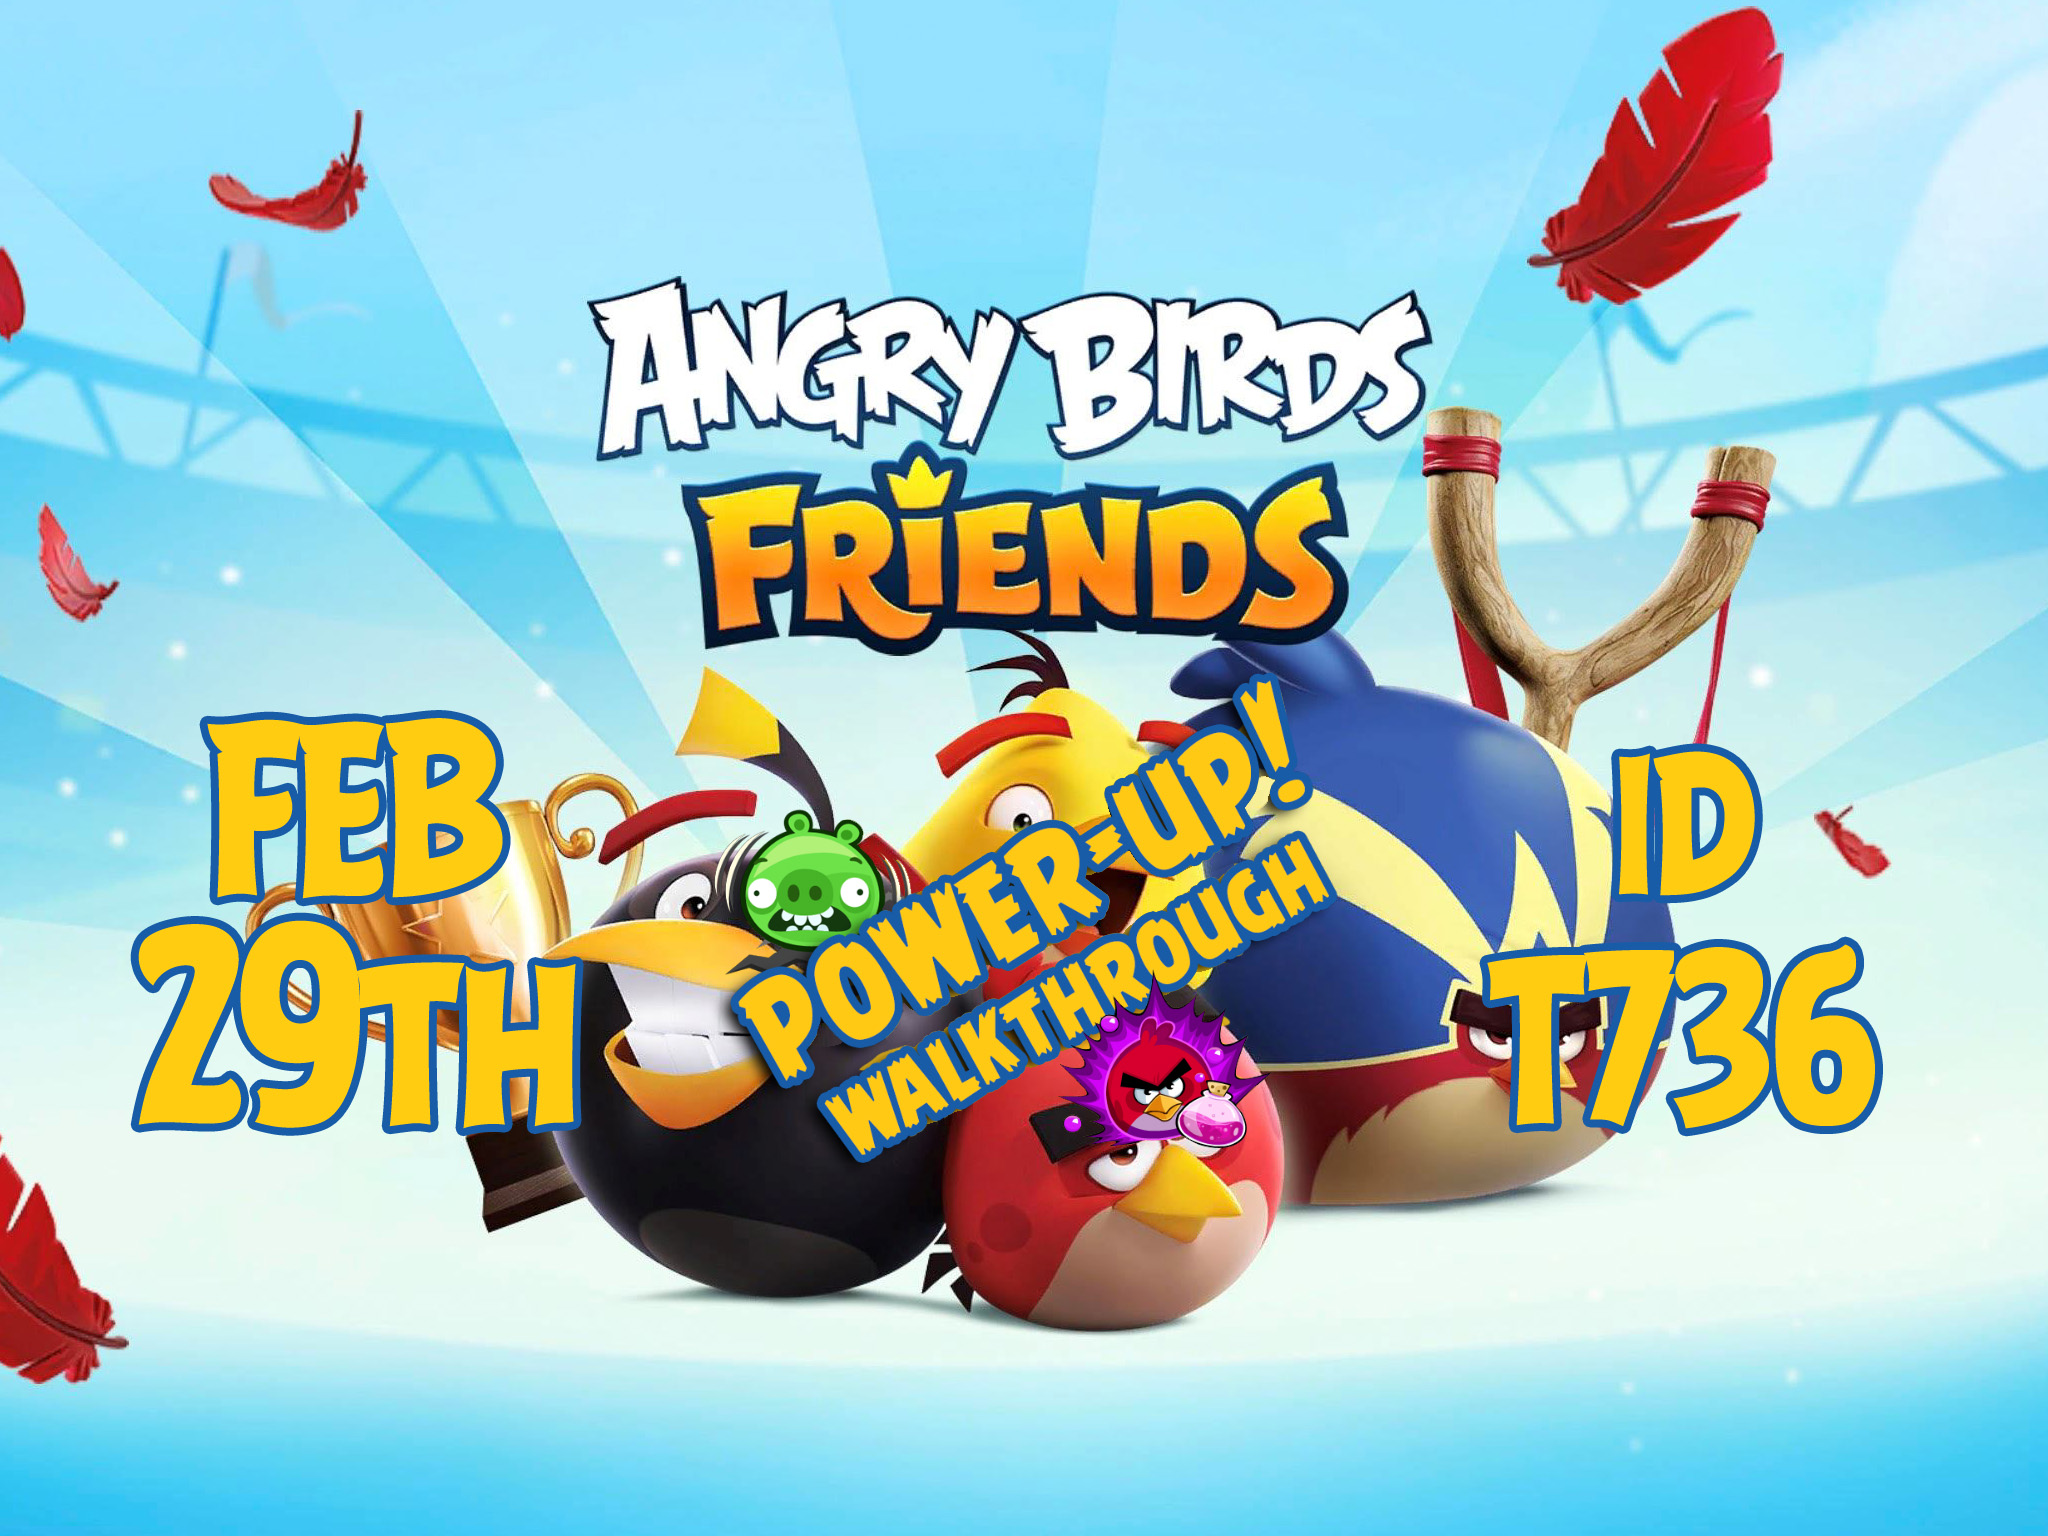 Angry-Birds-Friends-Tournament-T736c-Feature-Image-PU